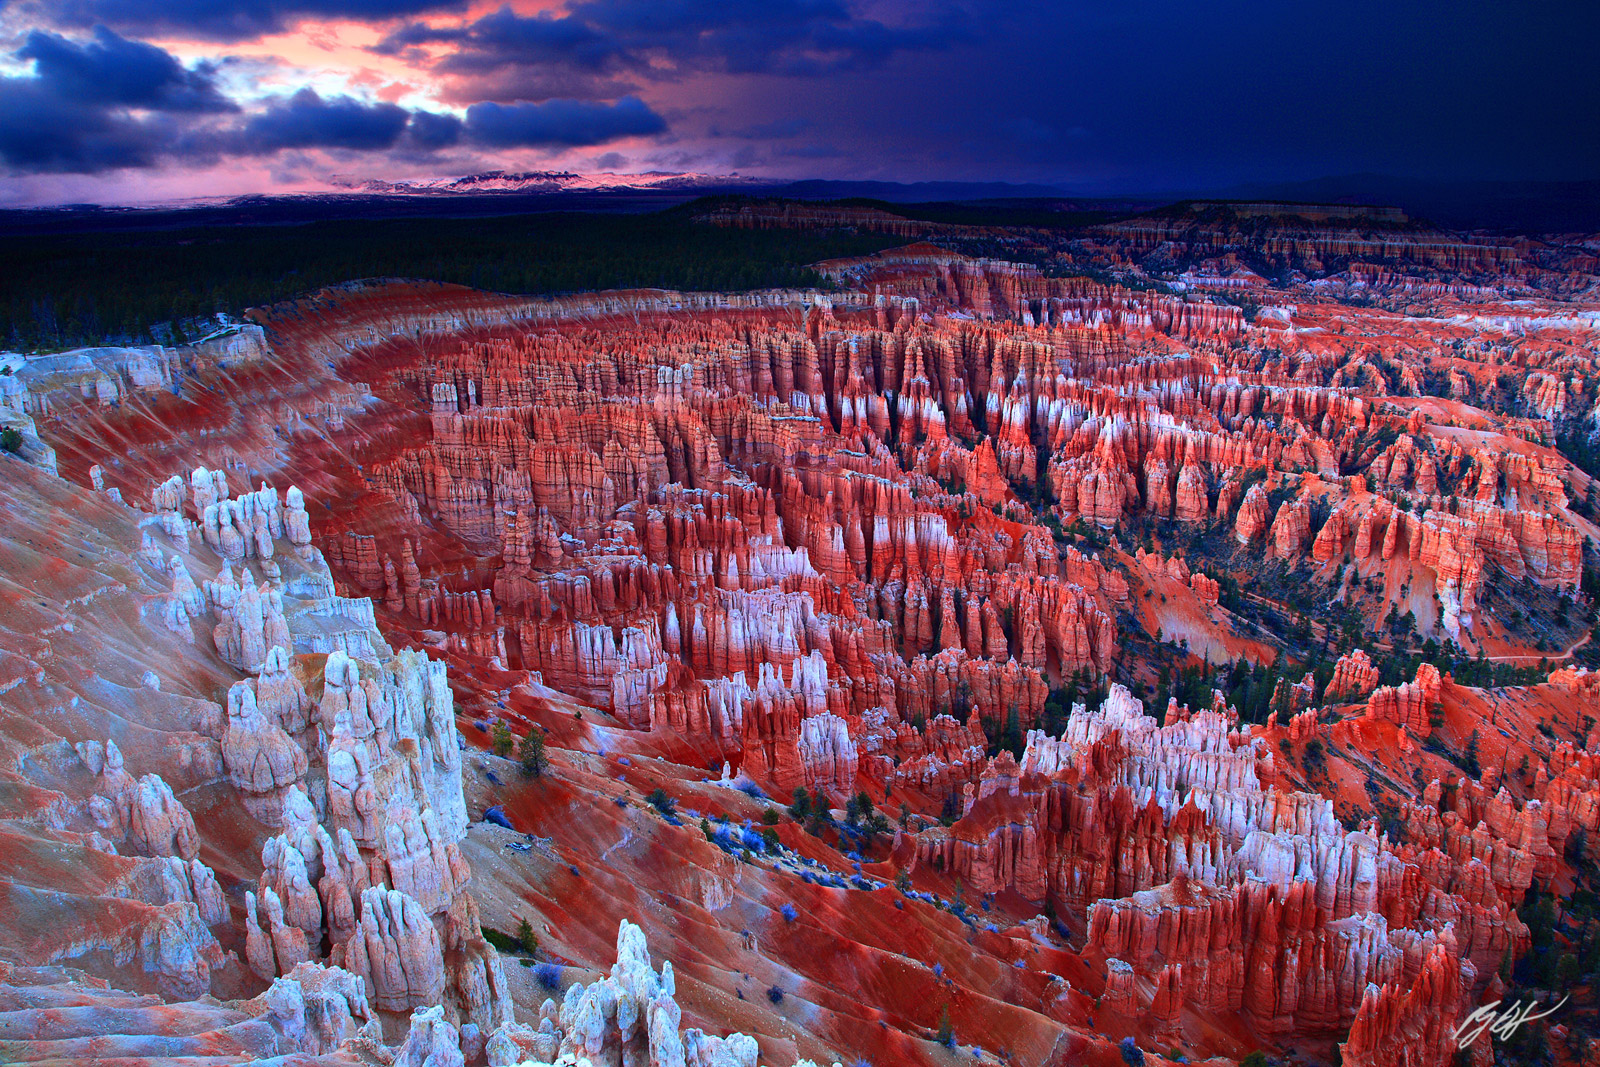 Sunset over the Hoodoos from Inspiration Point in Bryce Canyon National Park in Utah